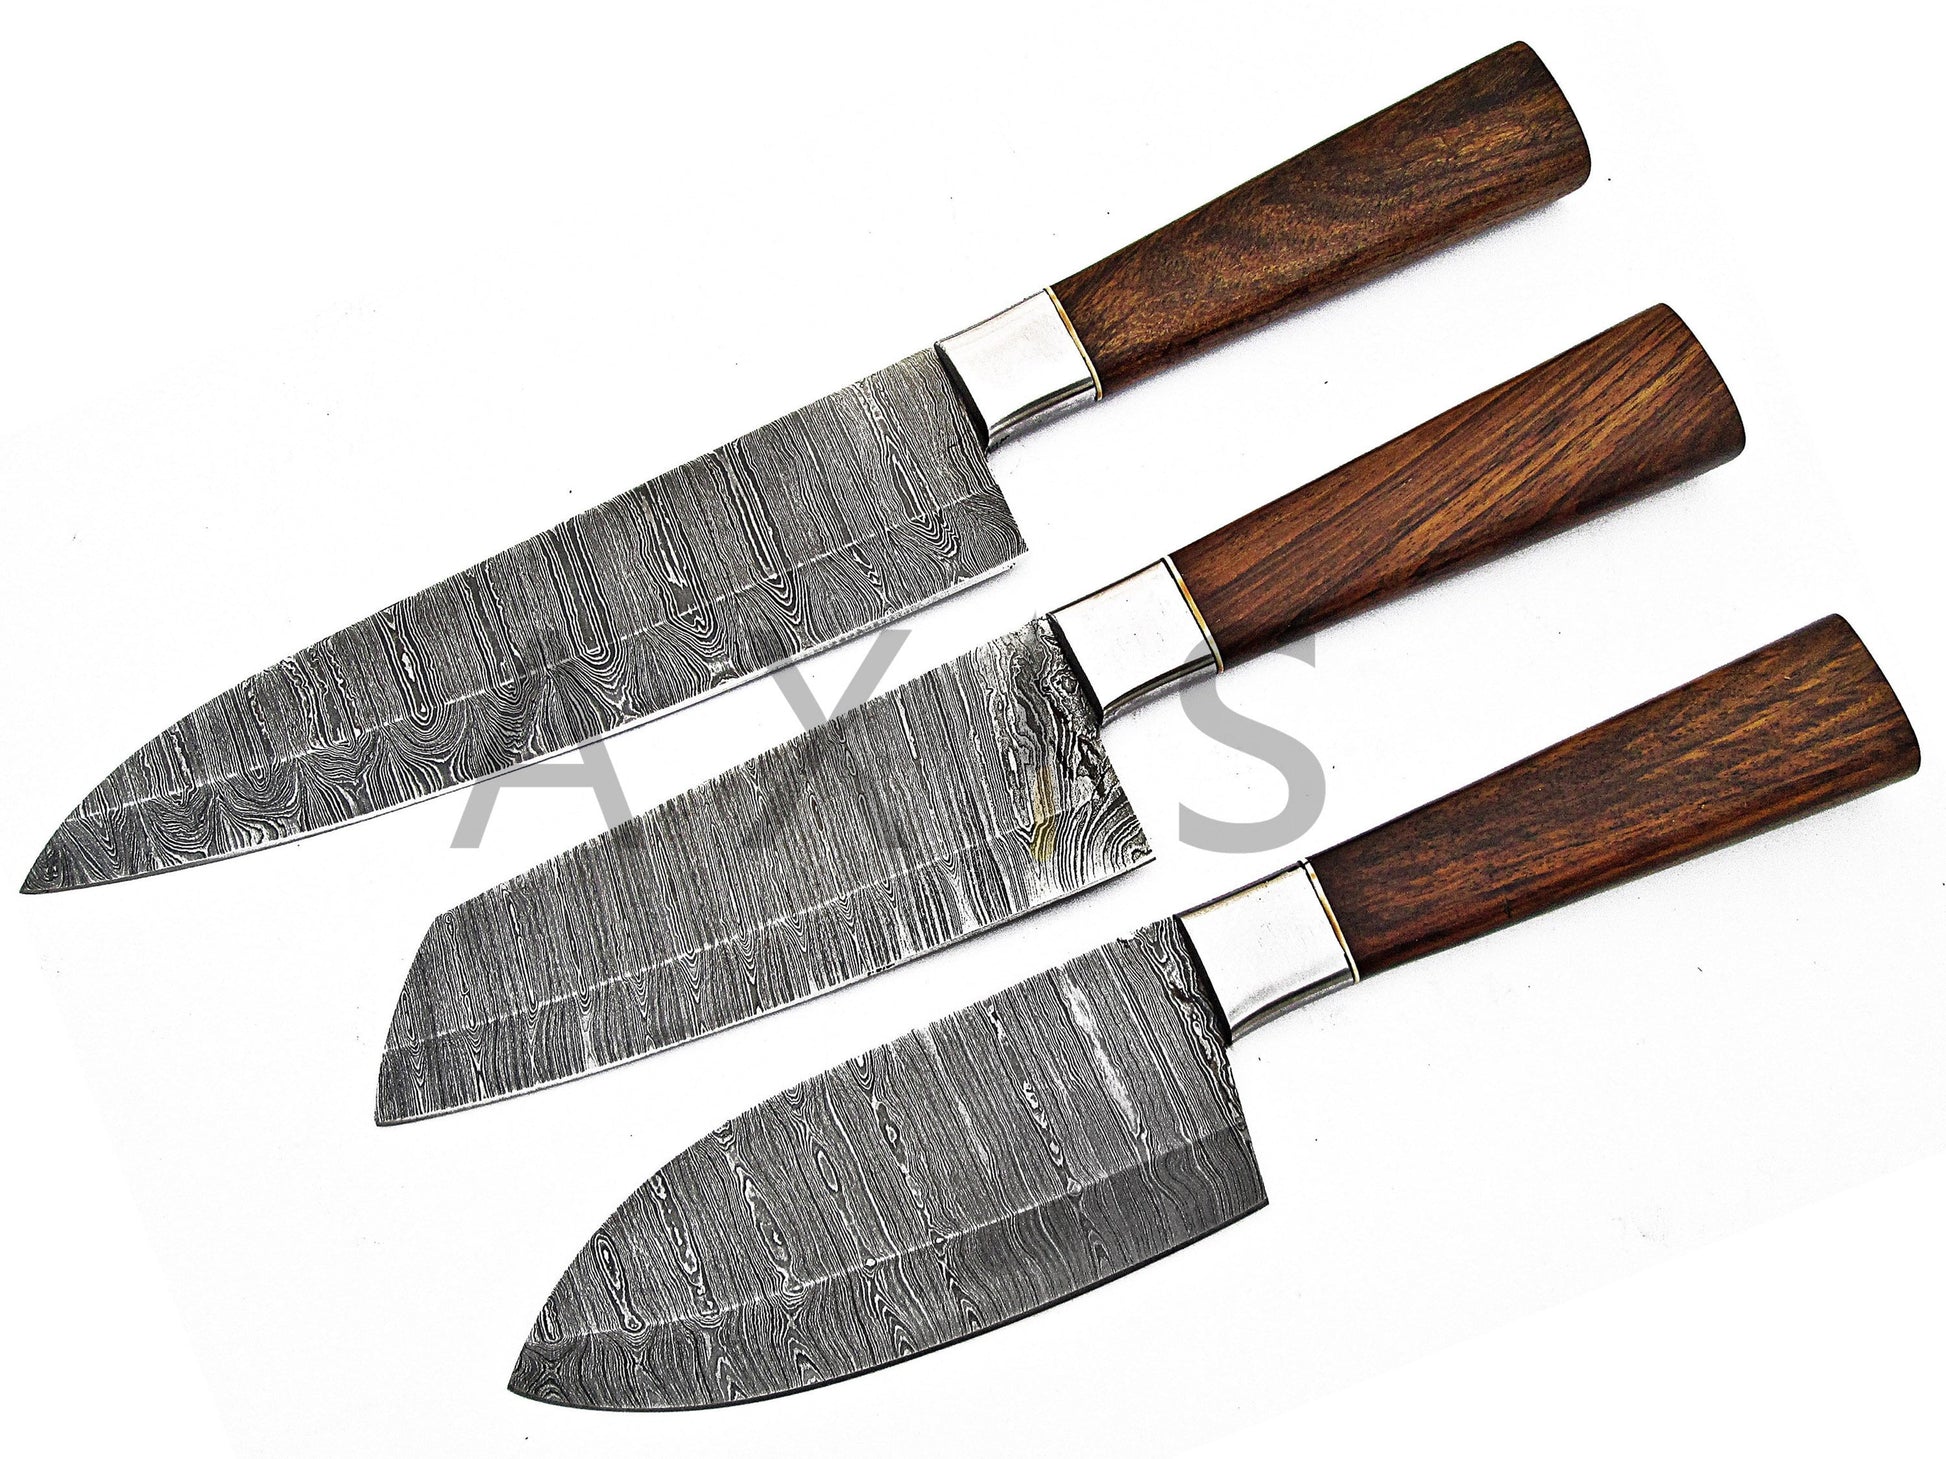 10”Pieces “Custom Hand Forged Damascus Steel Chef Knife Kitchen Knives Set